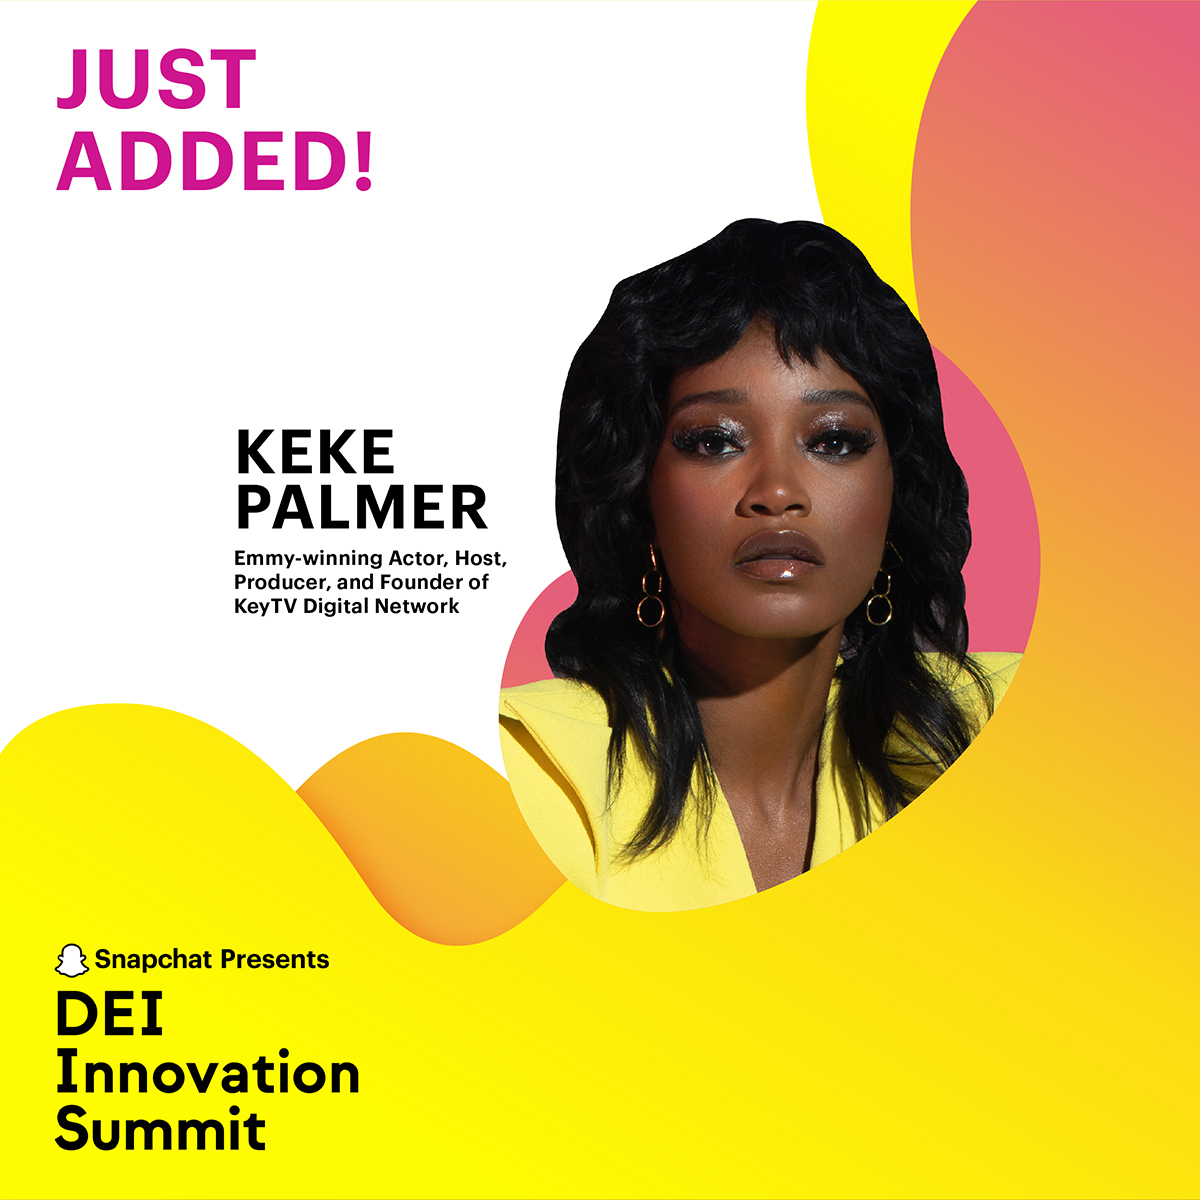 We’re excited to announce Keke Palmer is our newest speaker at this year’s DEI Innovation Summit! Tune in to hear the Emmy-winning actor and founder of KeyTV Digital Network discuss activism, representation in media, and more. Register: SnapDEISummit2022.splashthat.com/5